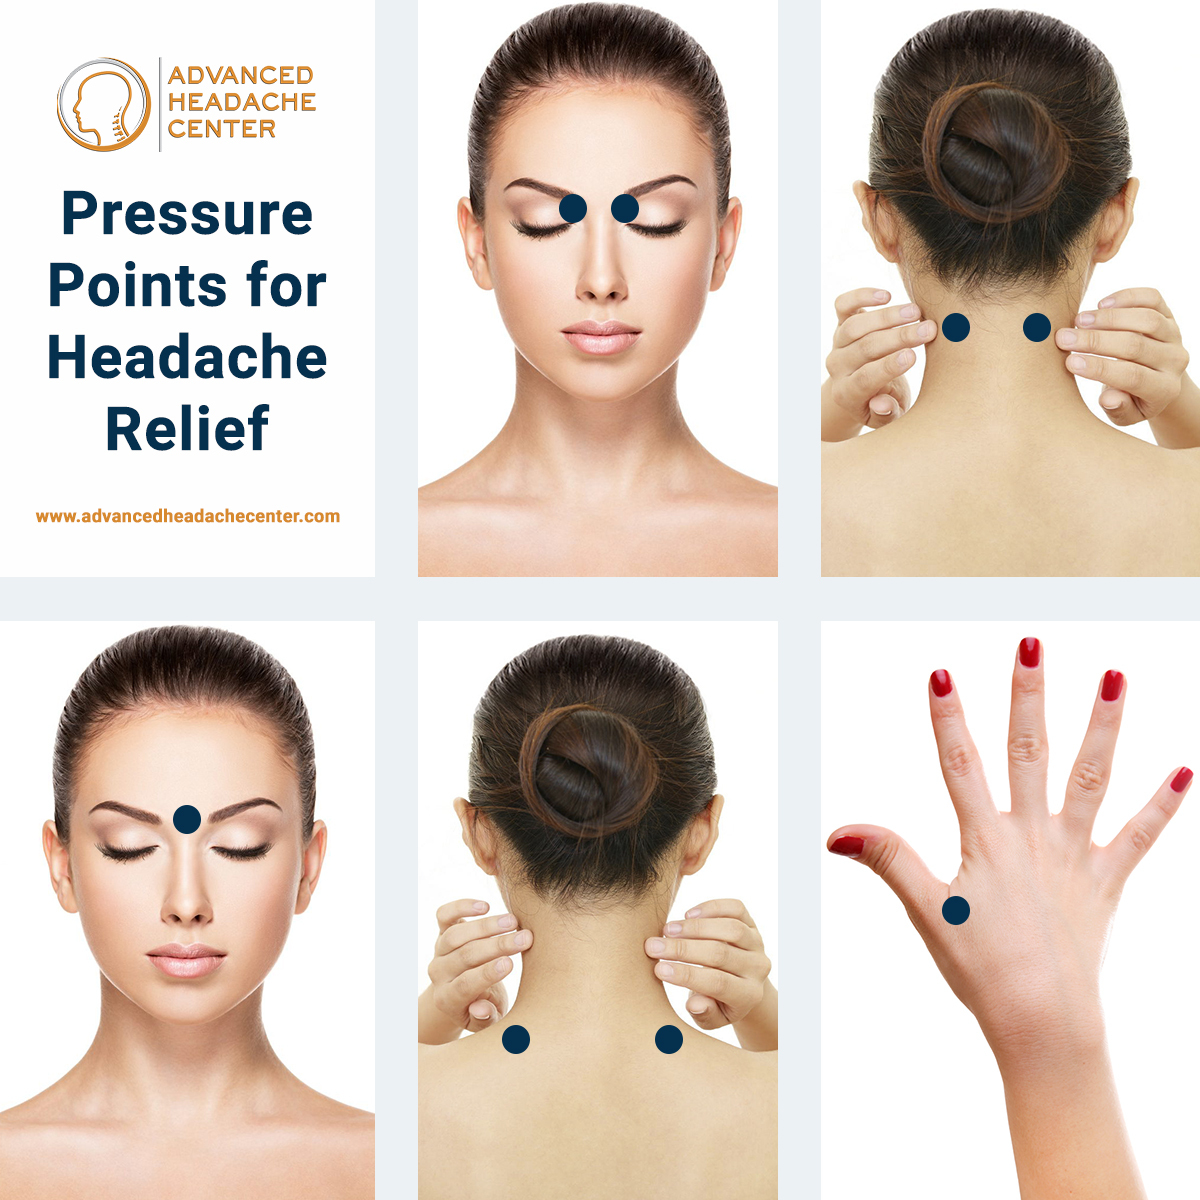 Is there a pressure point for migraines?